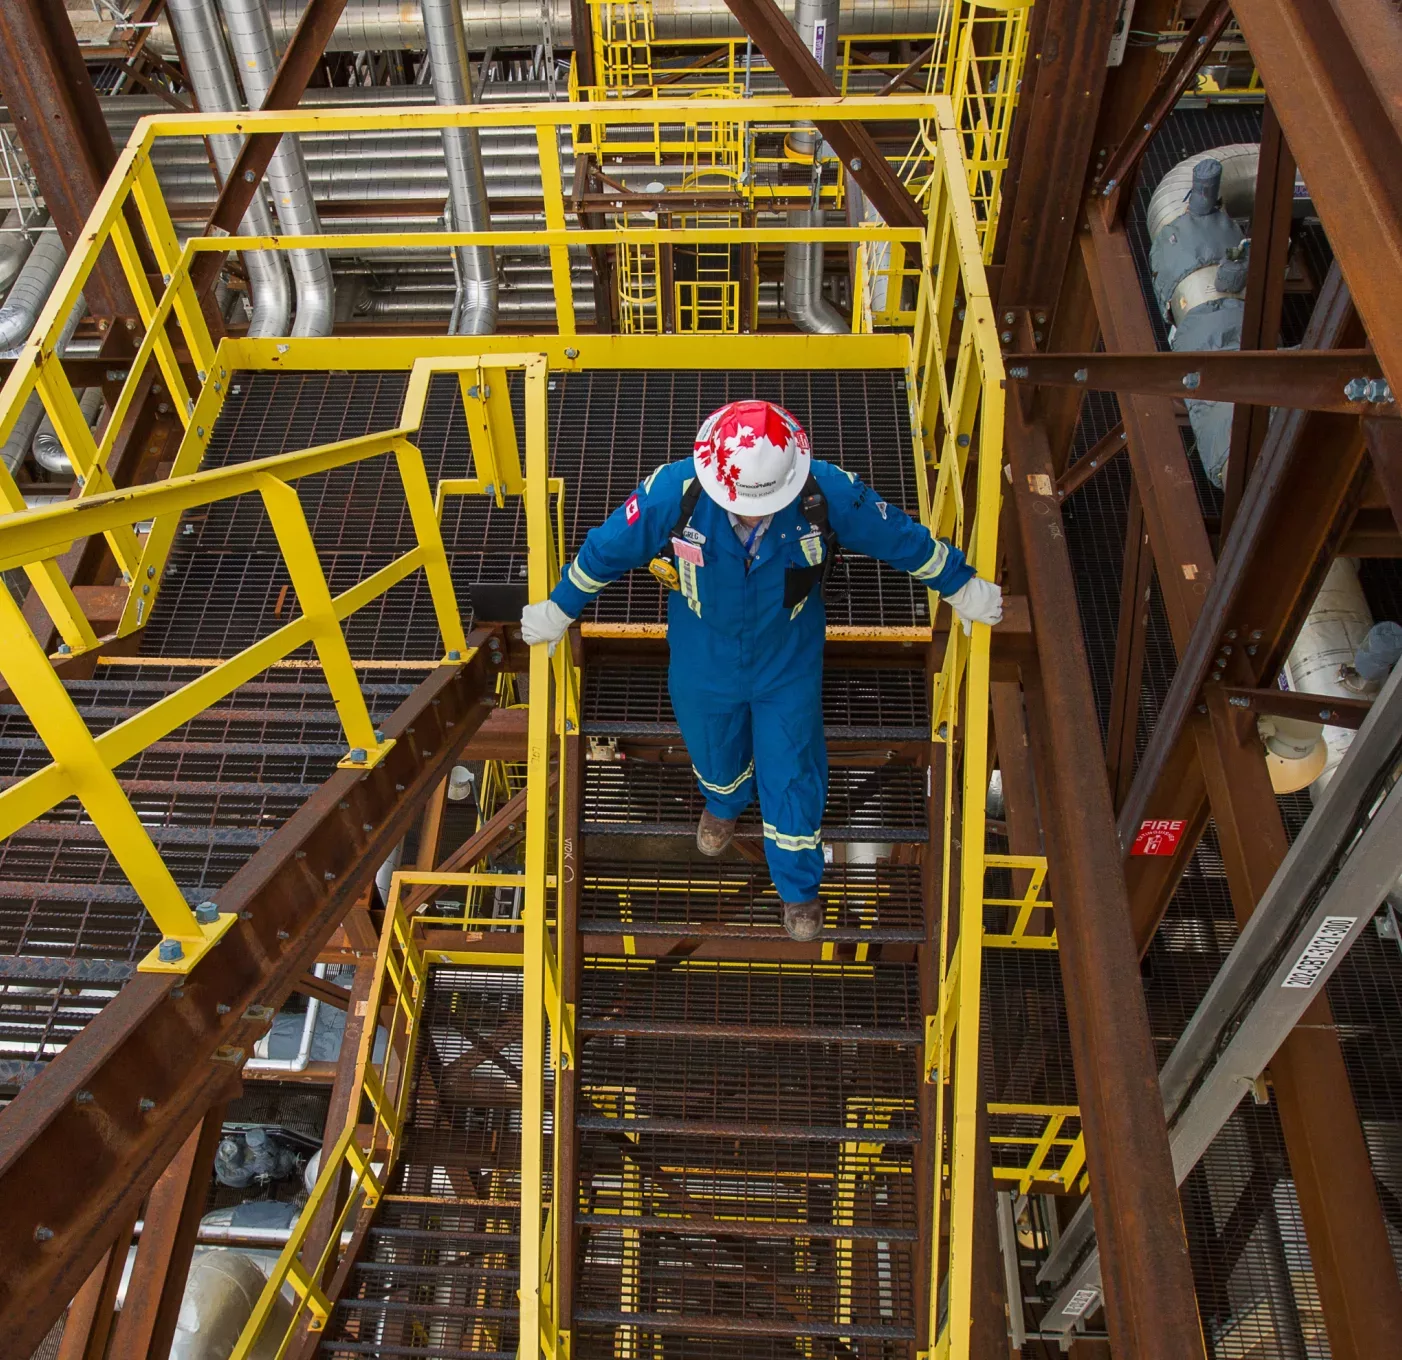 Person at an operating facility in protective gear, walking down metal stairs, viewed from above.